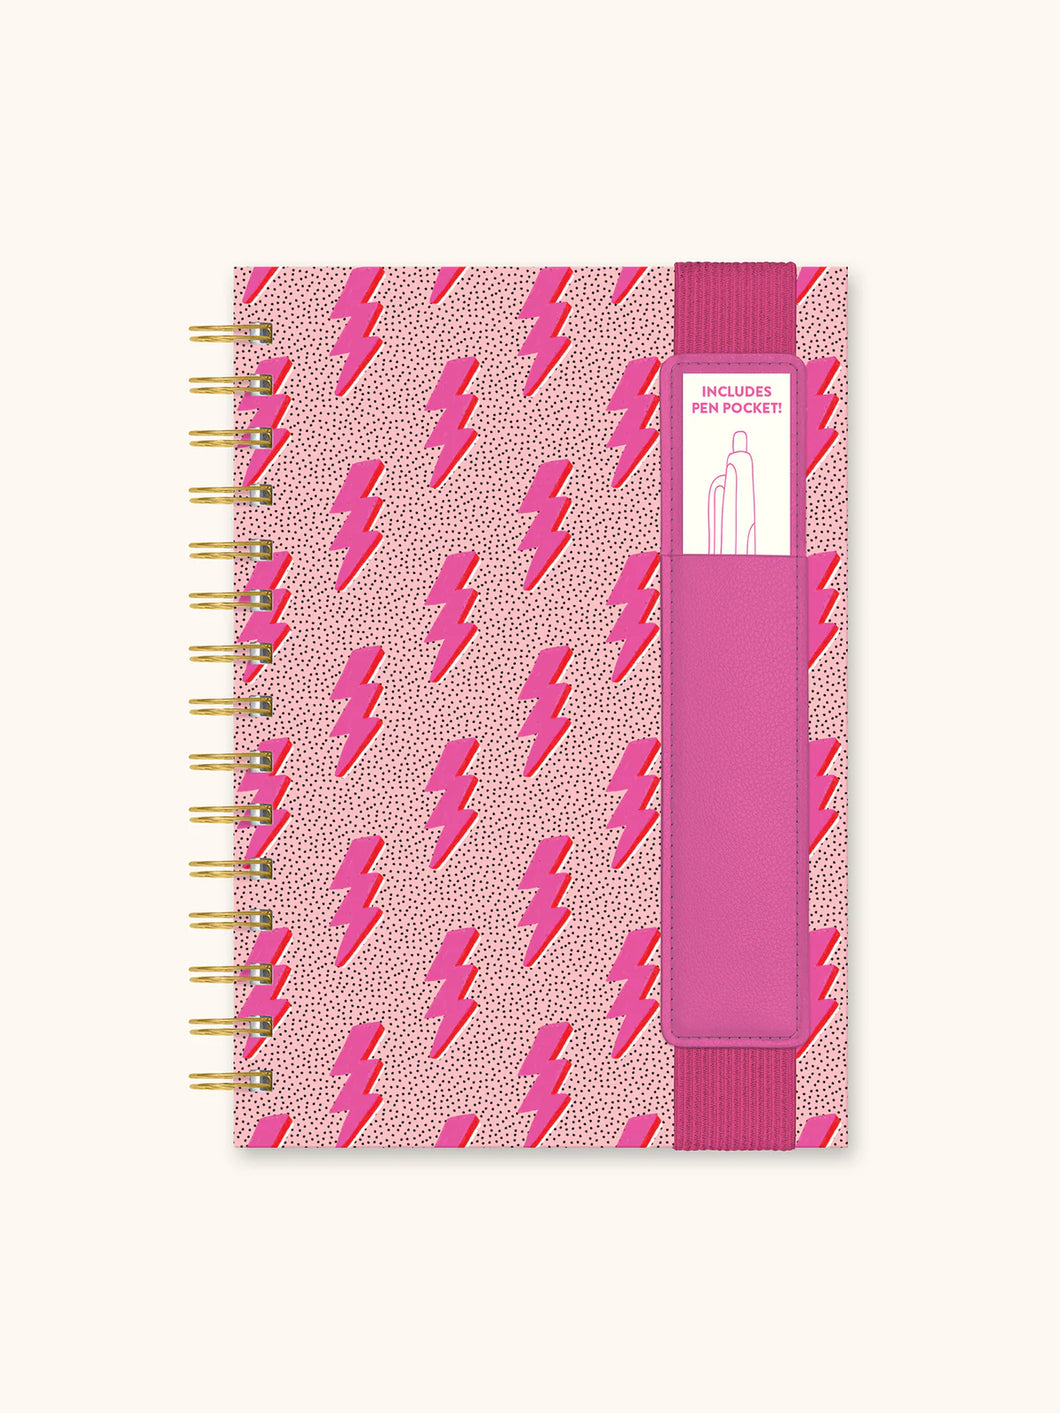 Studio Oh! Charged Up Oliver Notebook with Pen Pocket